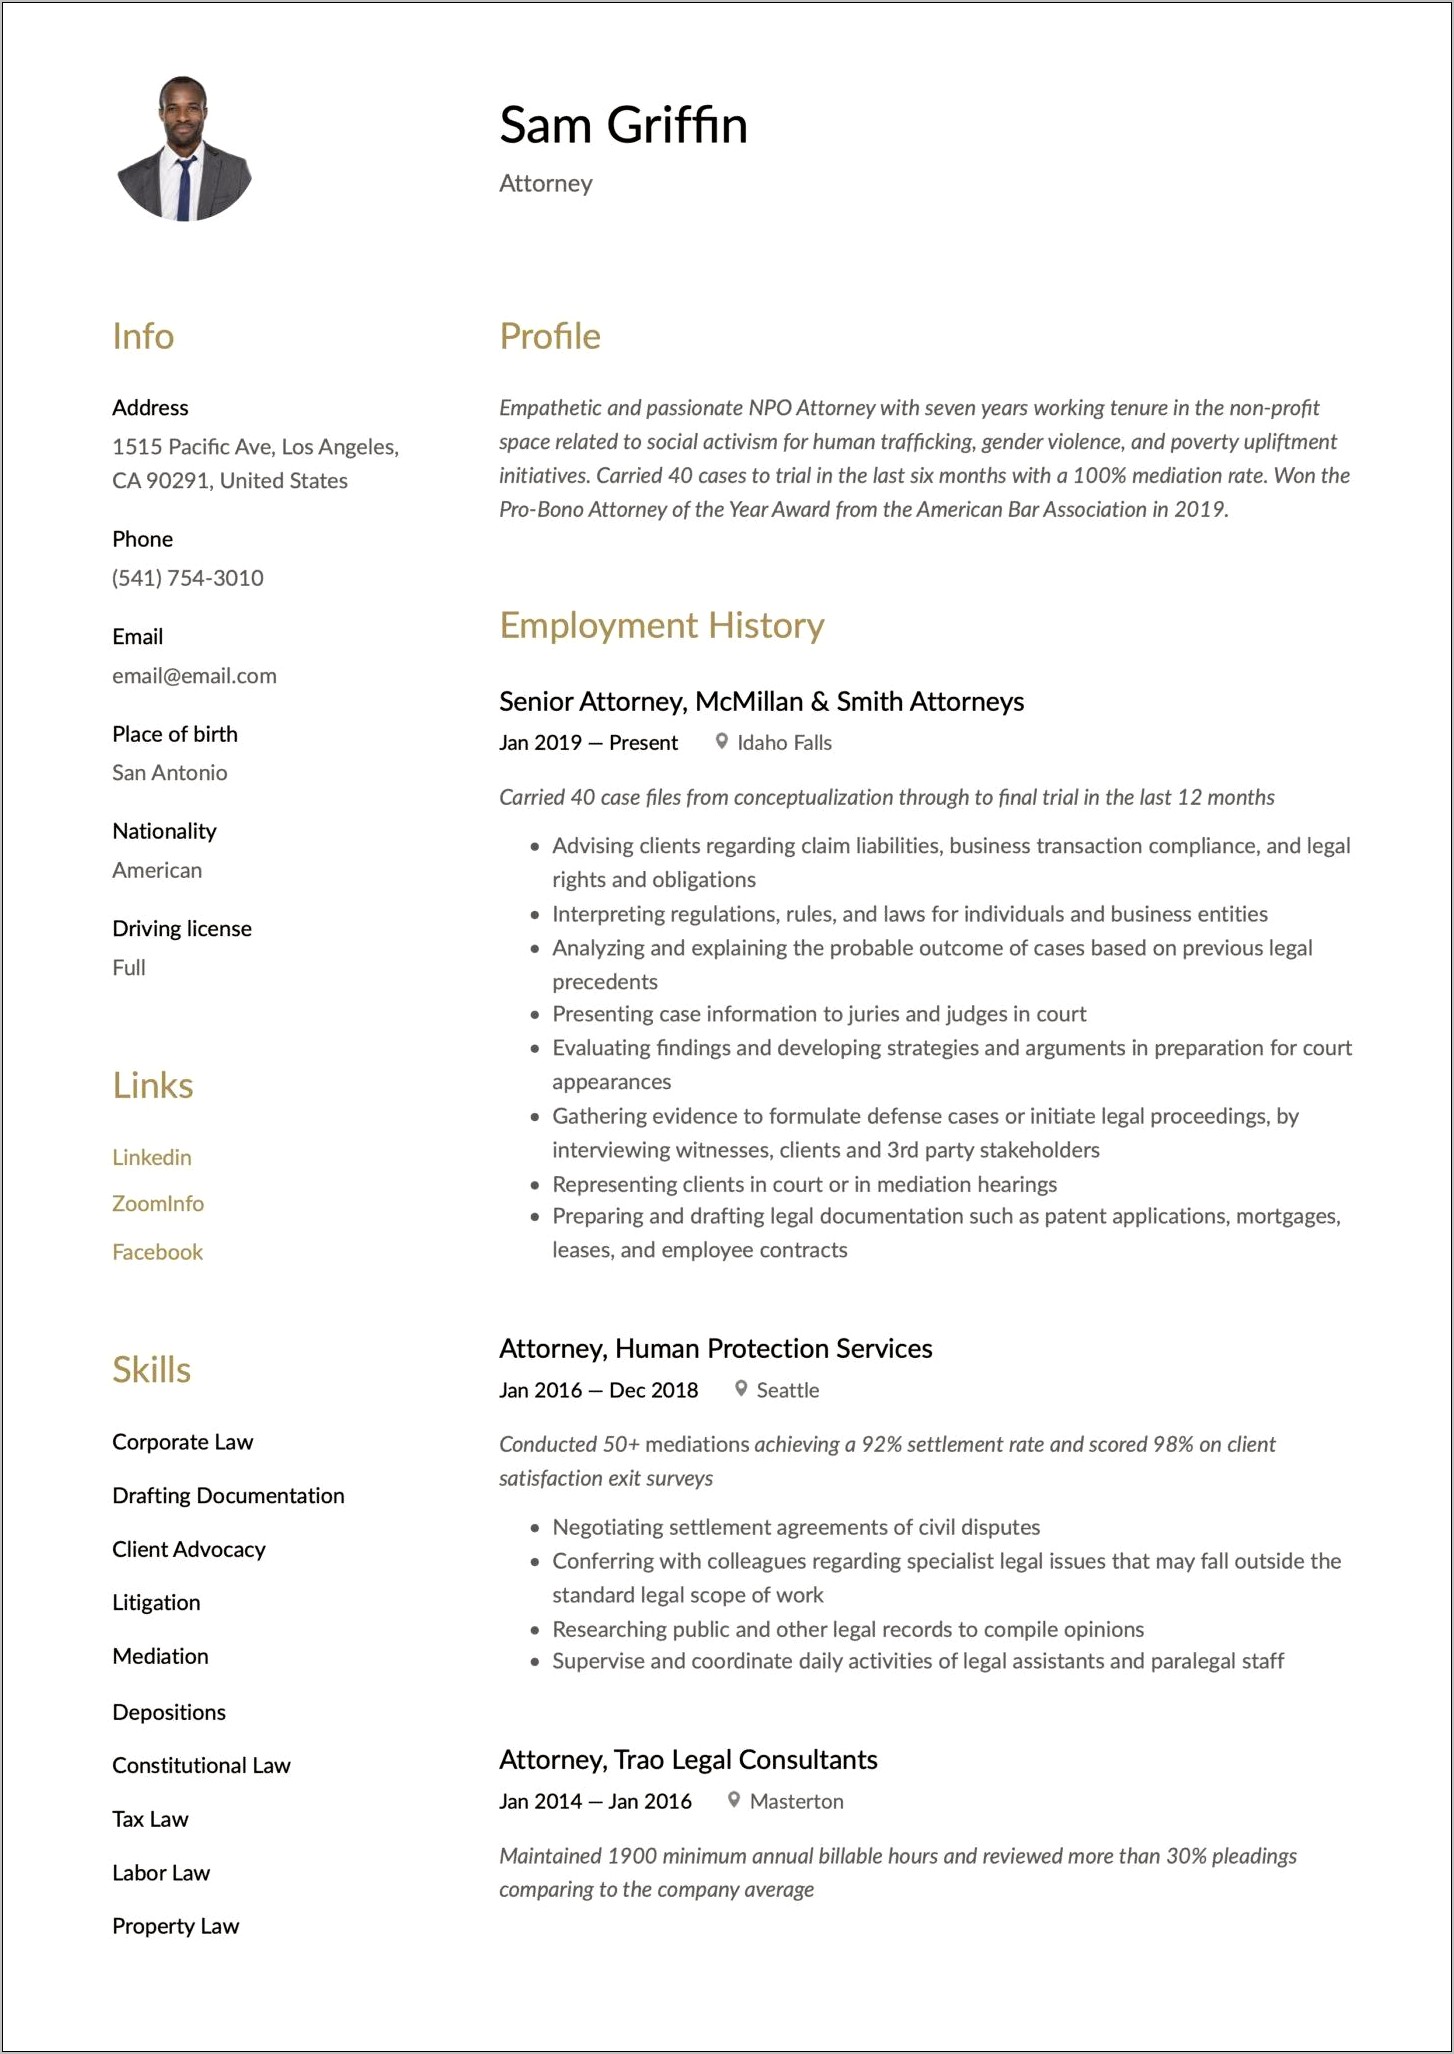 Resume Summary For In House Counsel